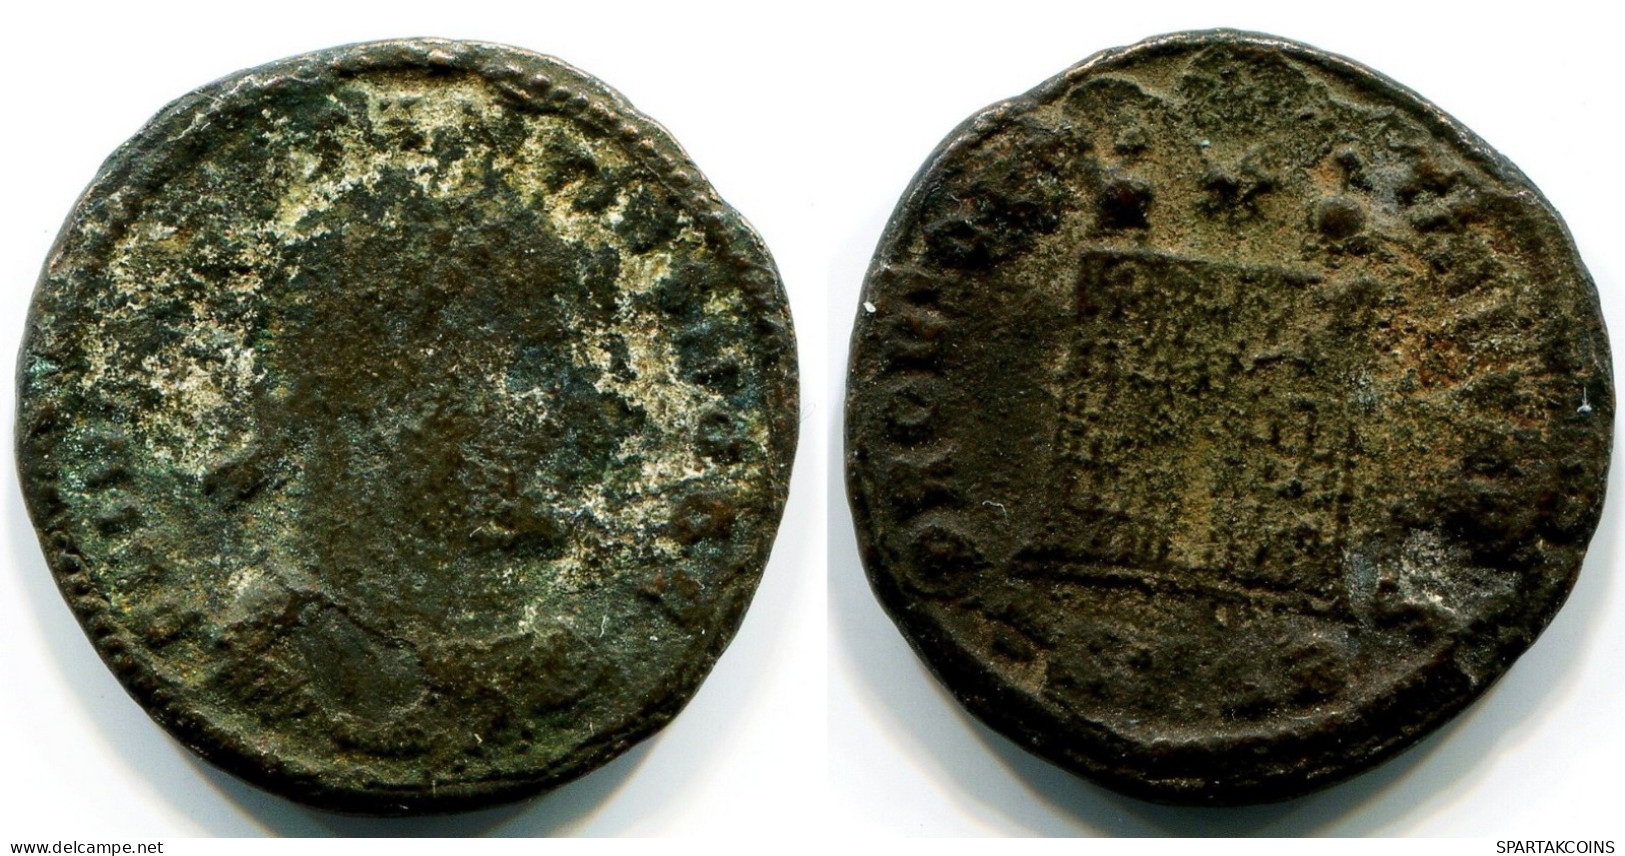 CONSTANTINE I THESSALONICA FROM THE ROYAL ONTARIO MUSEUM #ANC11140.14.E.A - El Imperio Christiano (307 / 363)